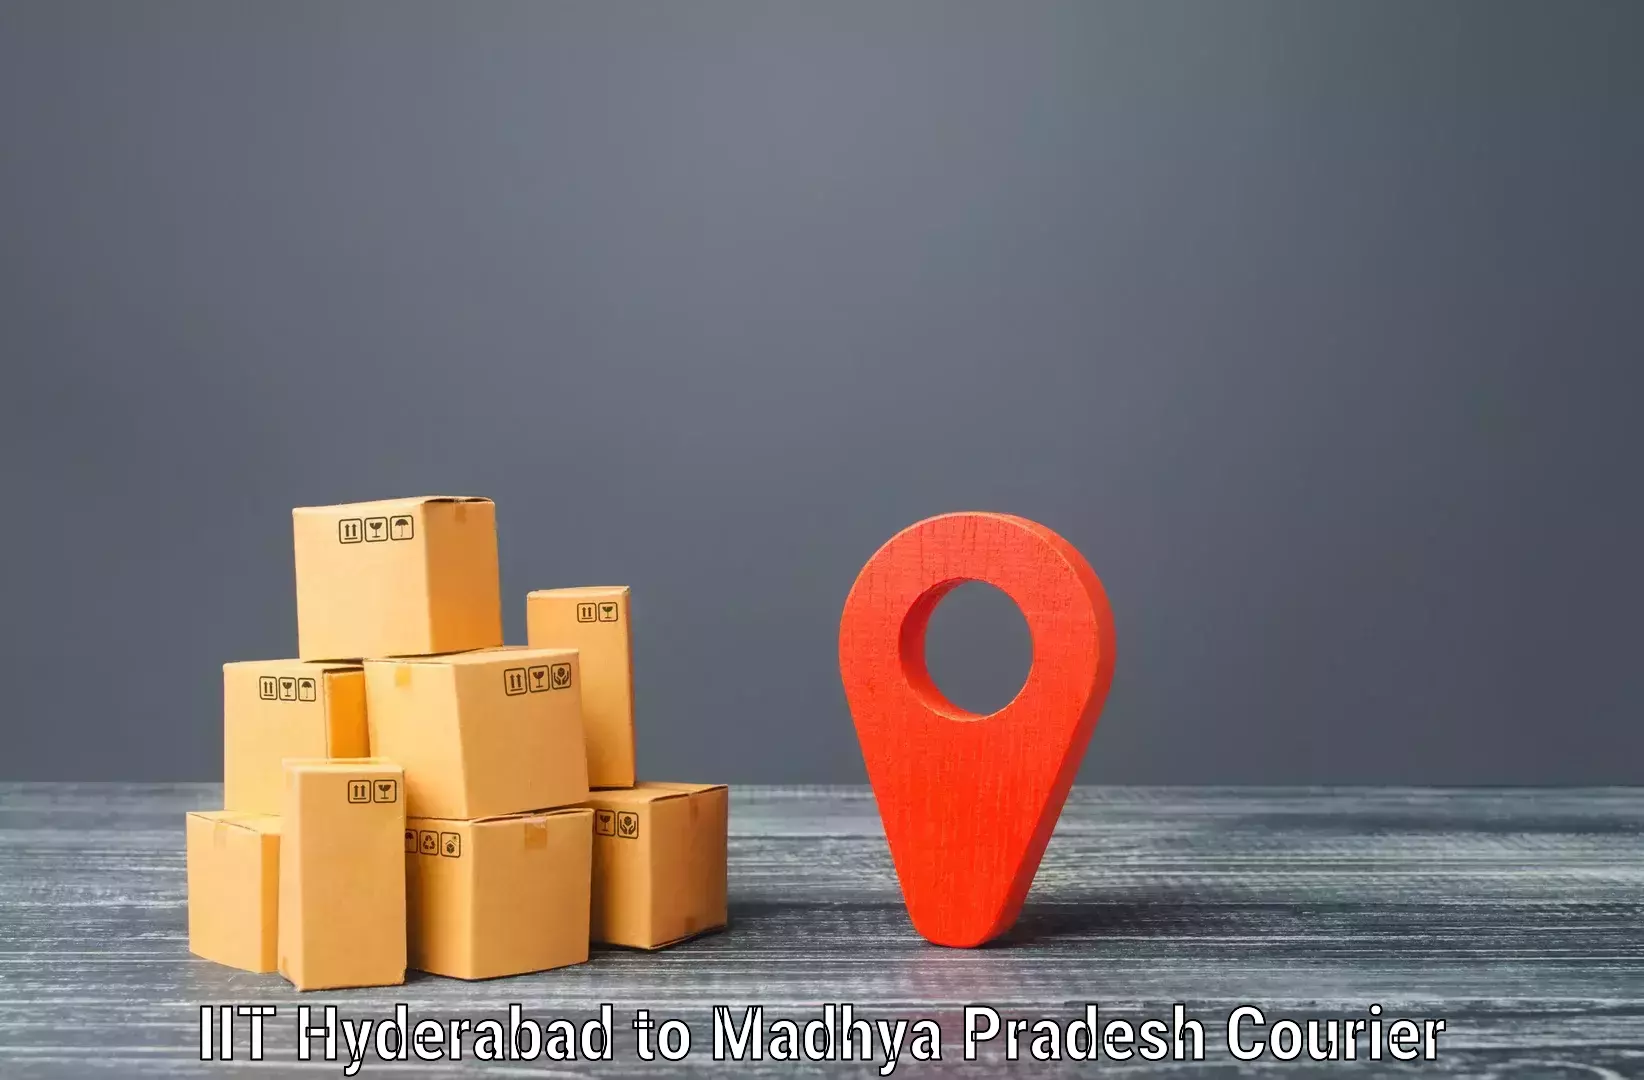 Reliable courier services IIT Hyderabad to Garoth